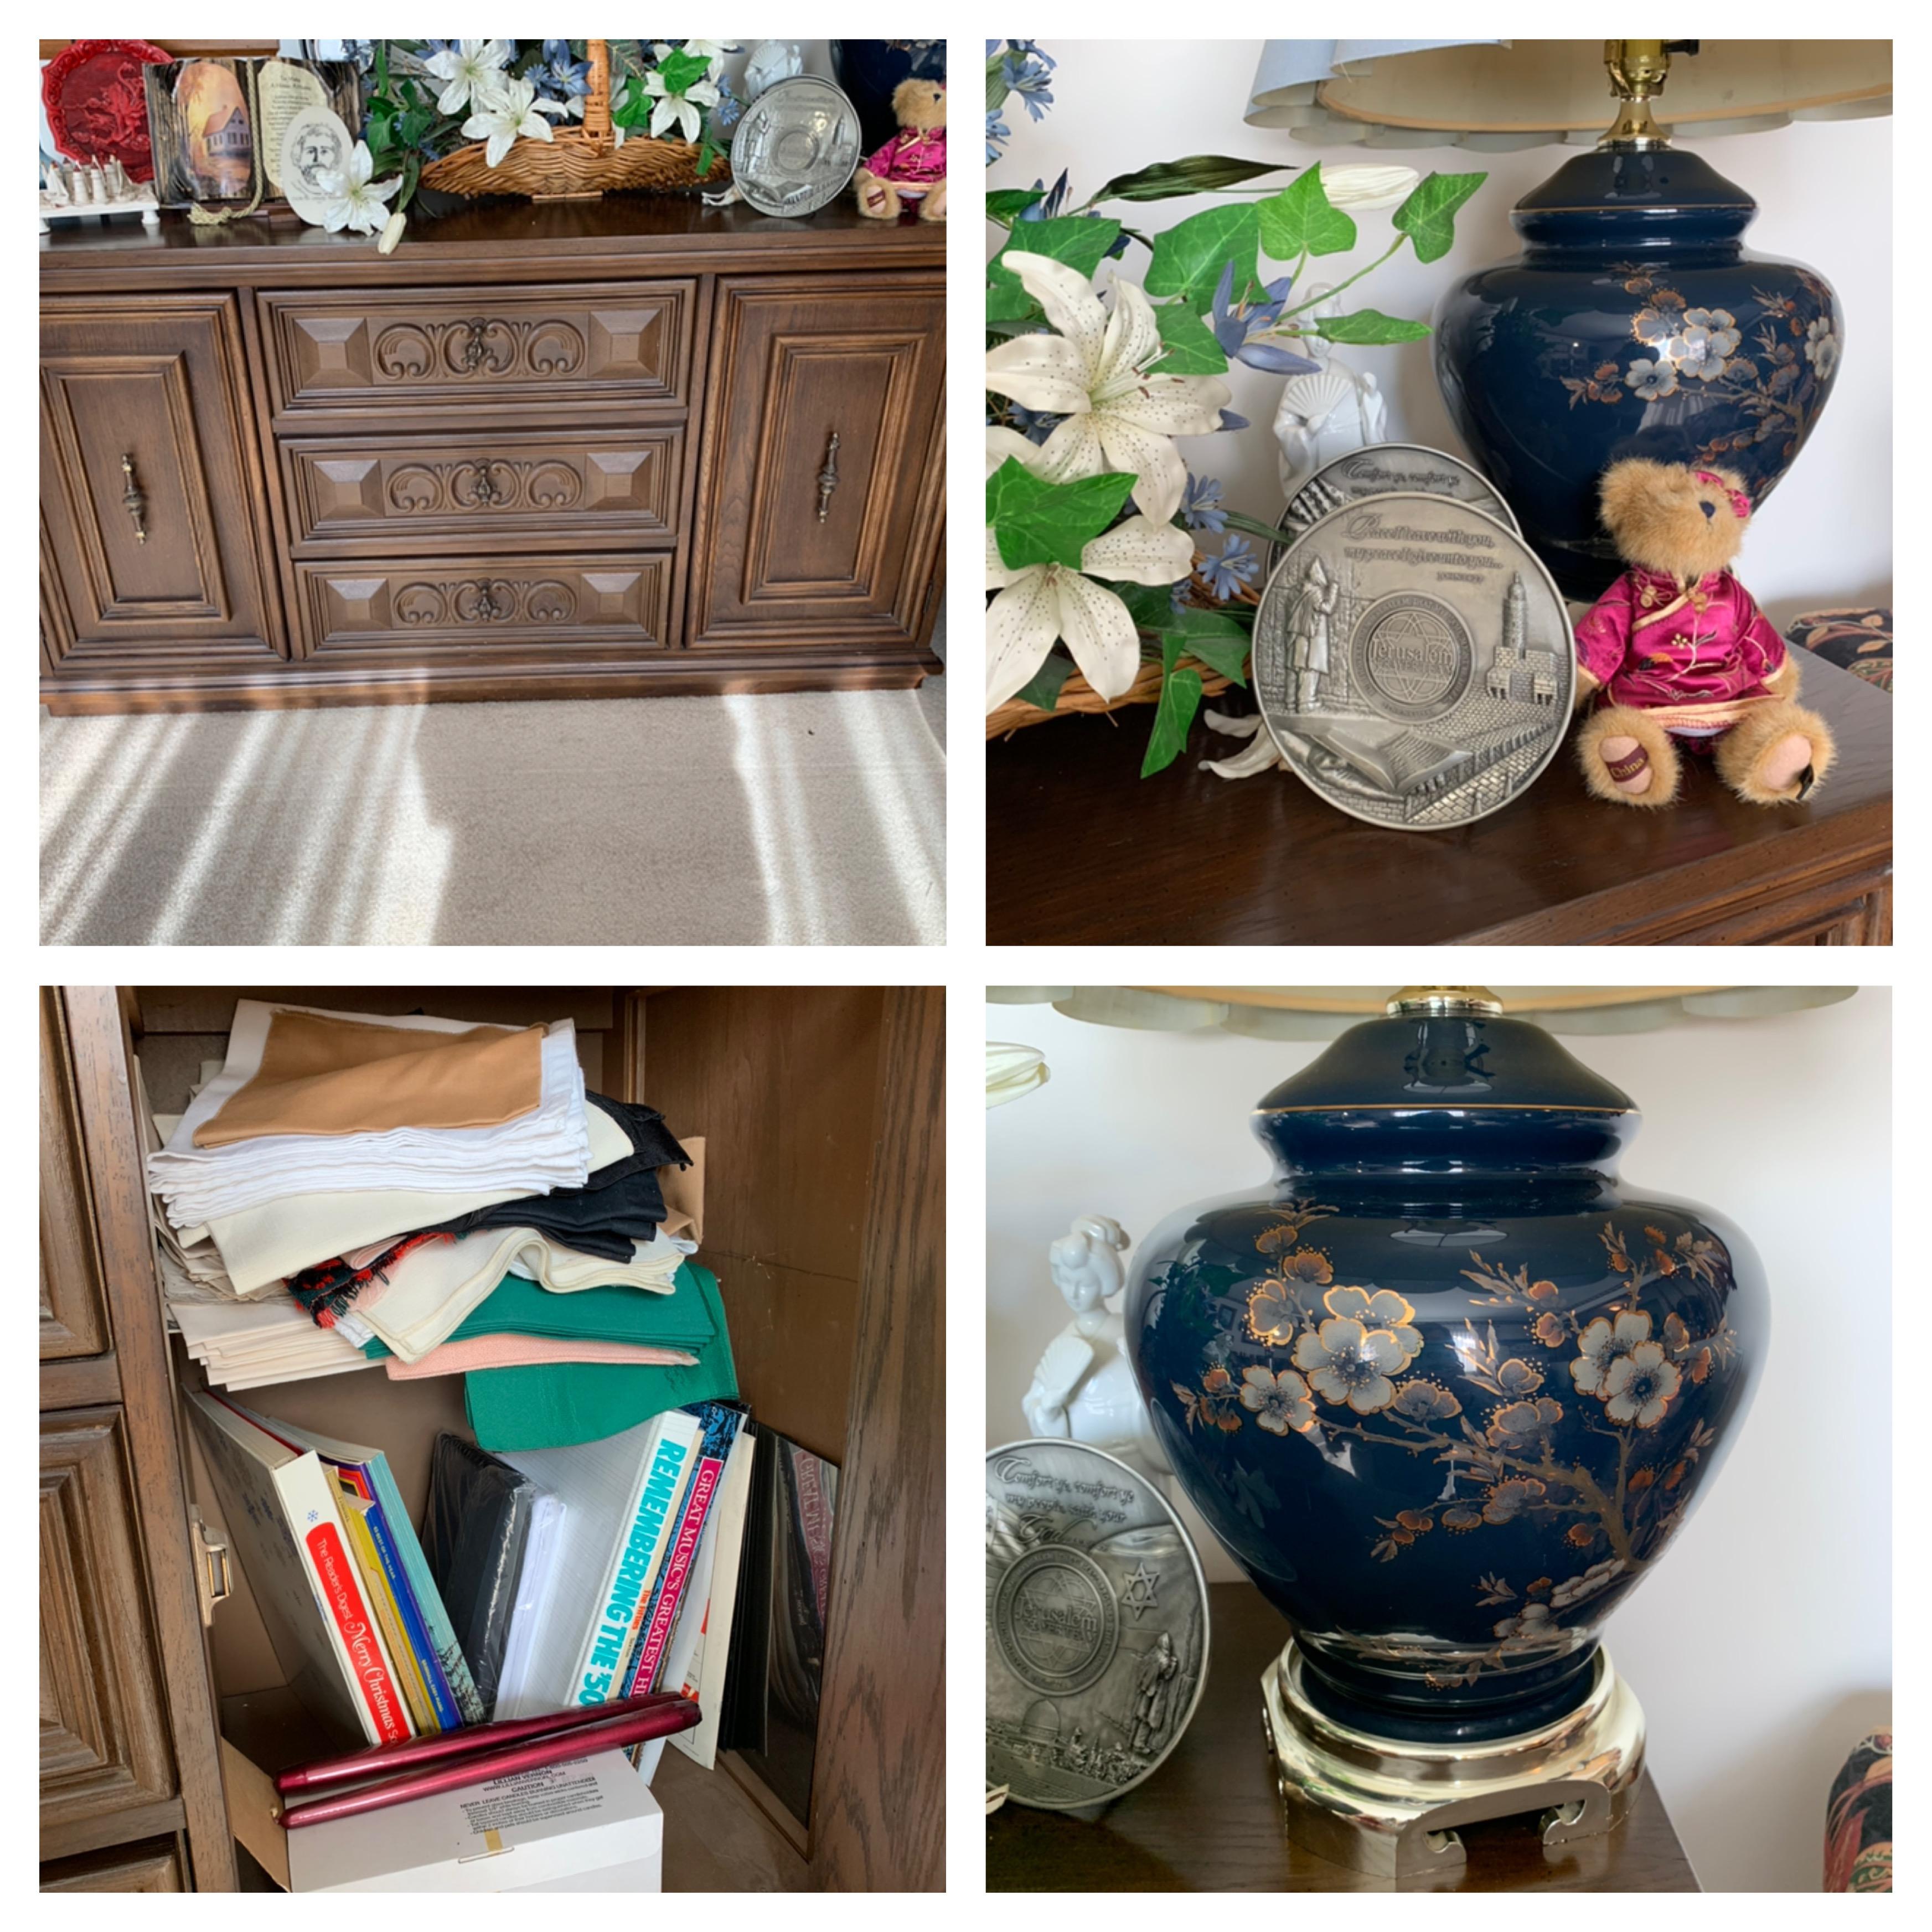 Buffet & Contents - Placemats, Candles, Boyds Bear & More